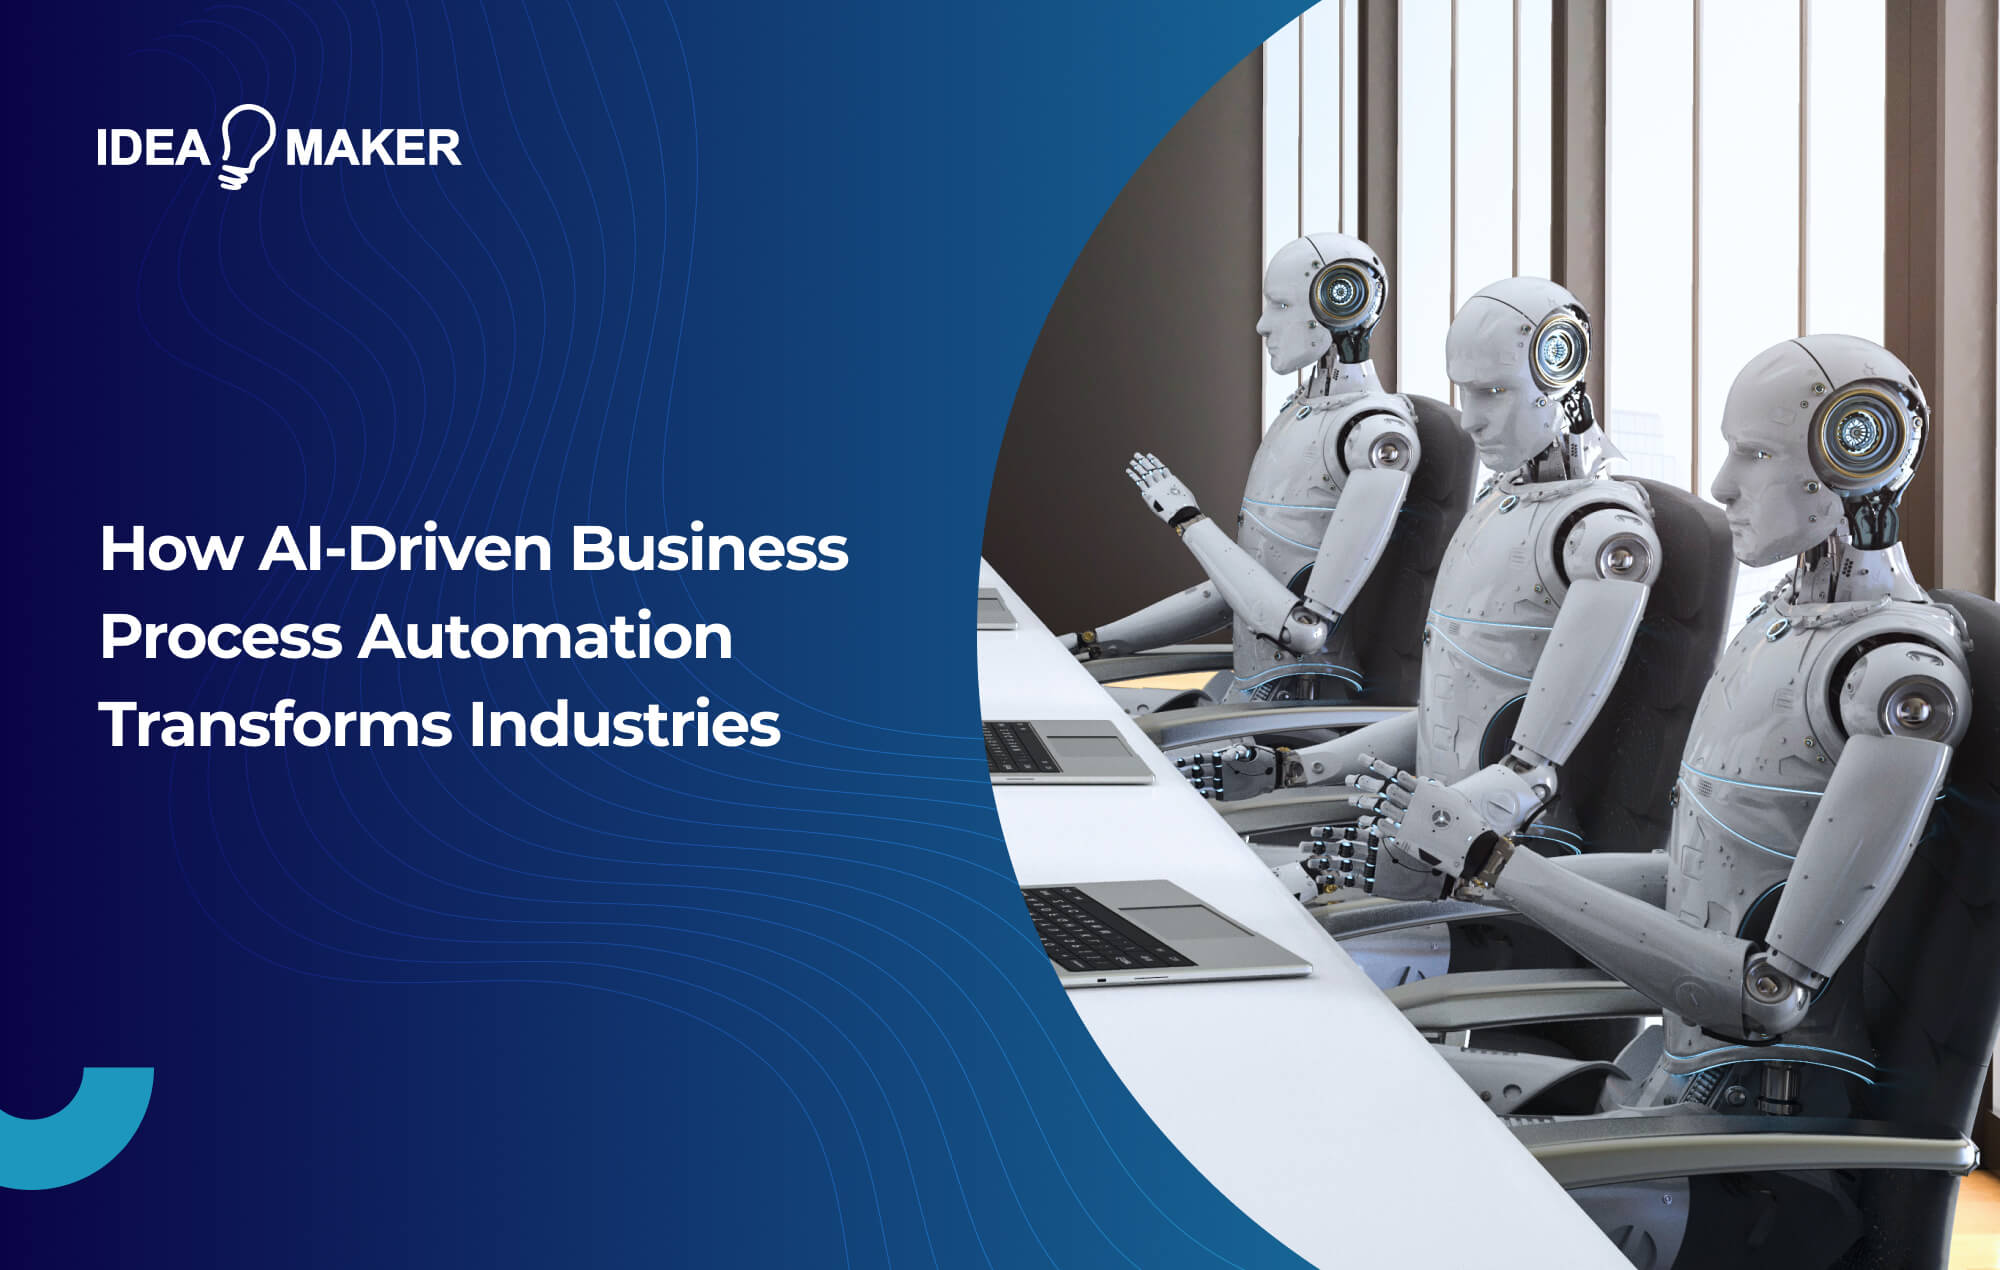 Ideamaker - How AI-Driven Business Process Automation Transforms Industries